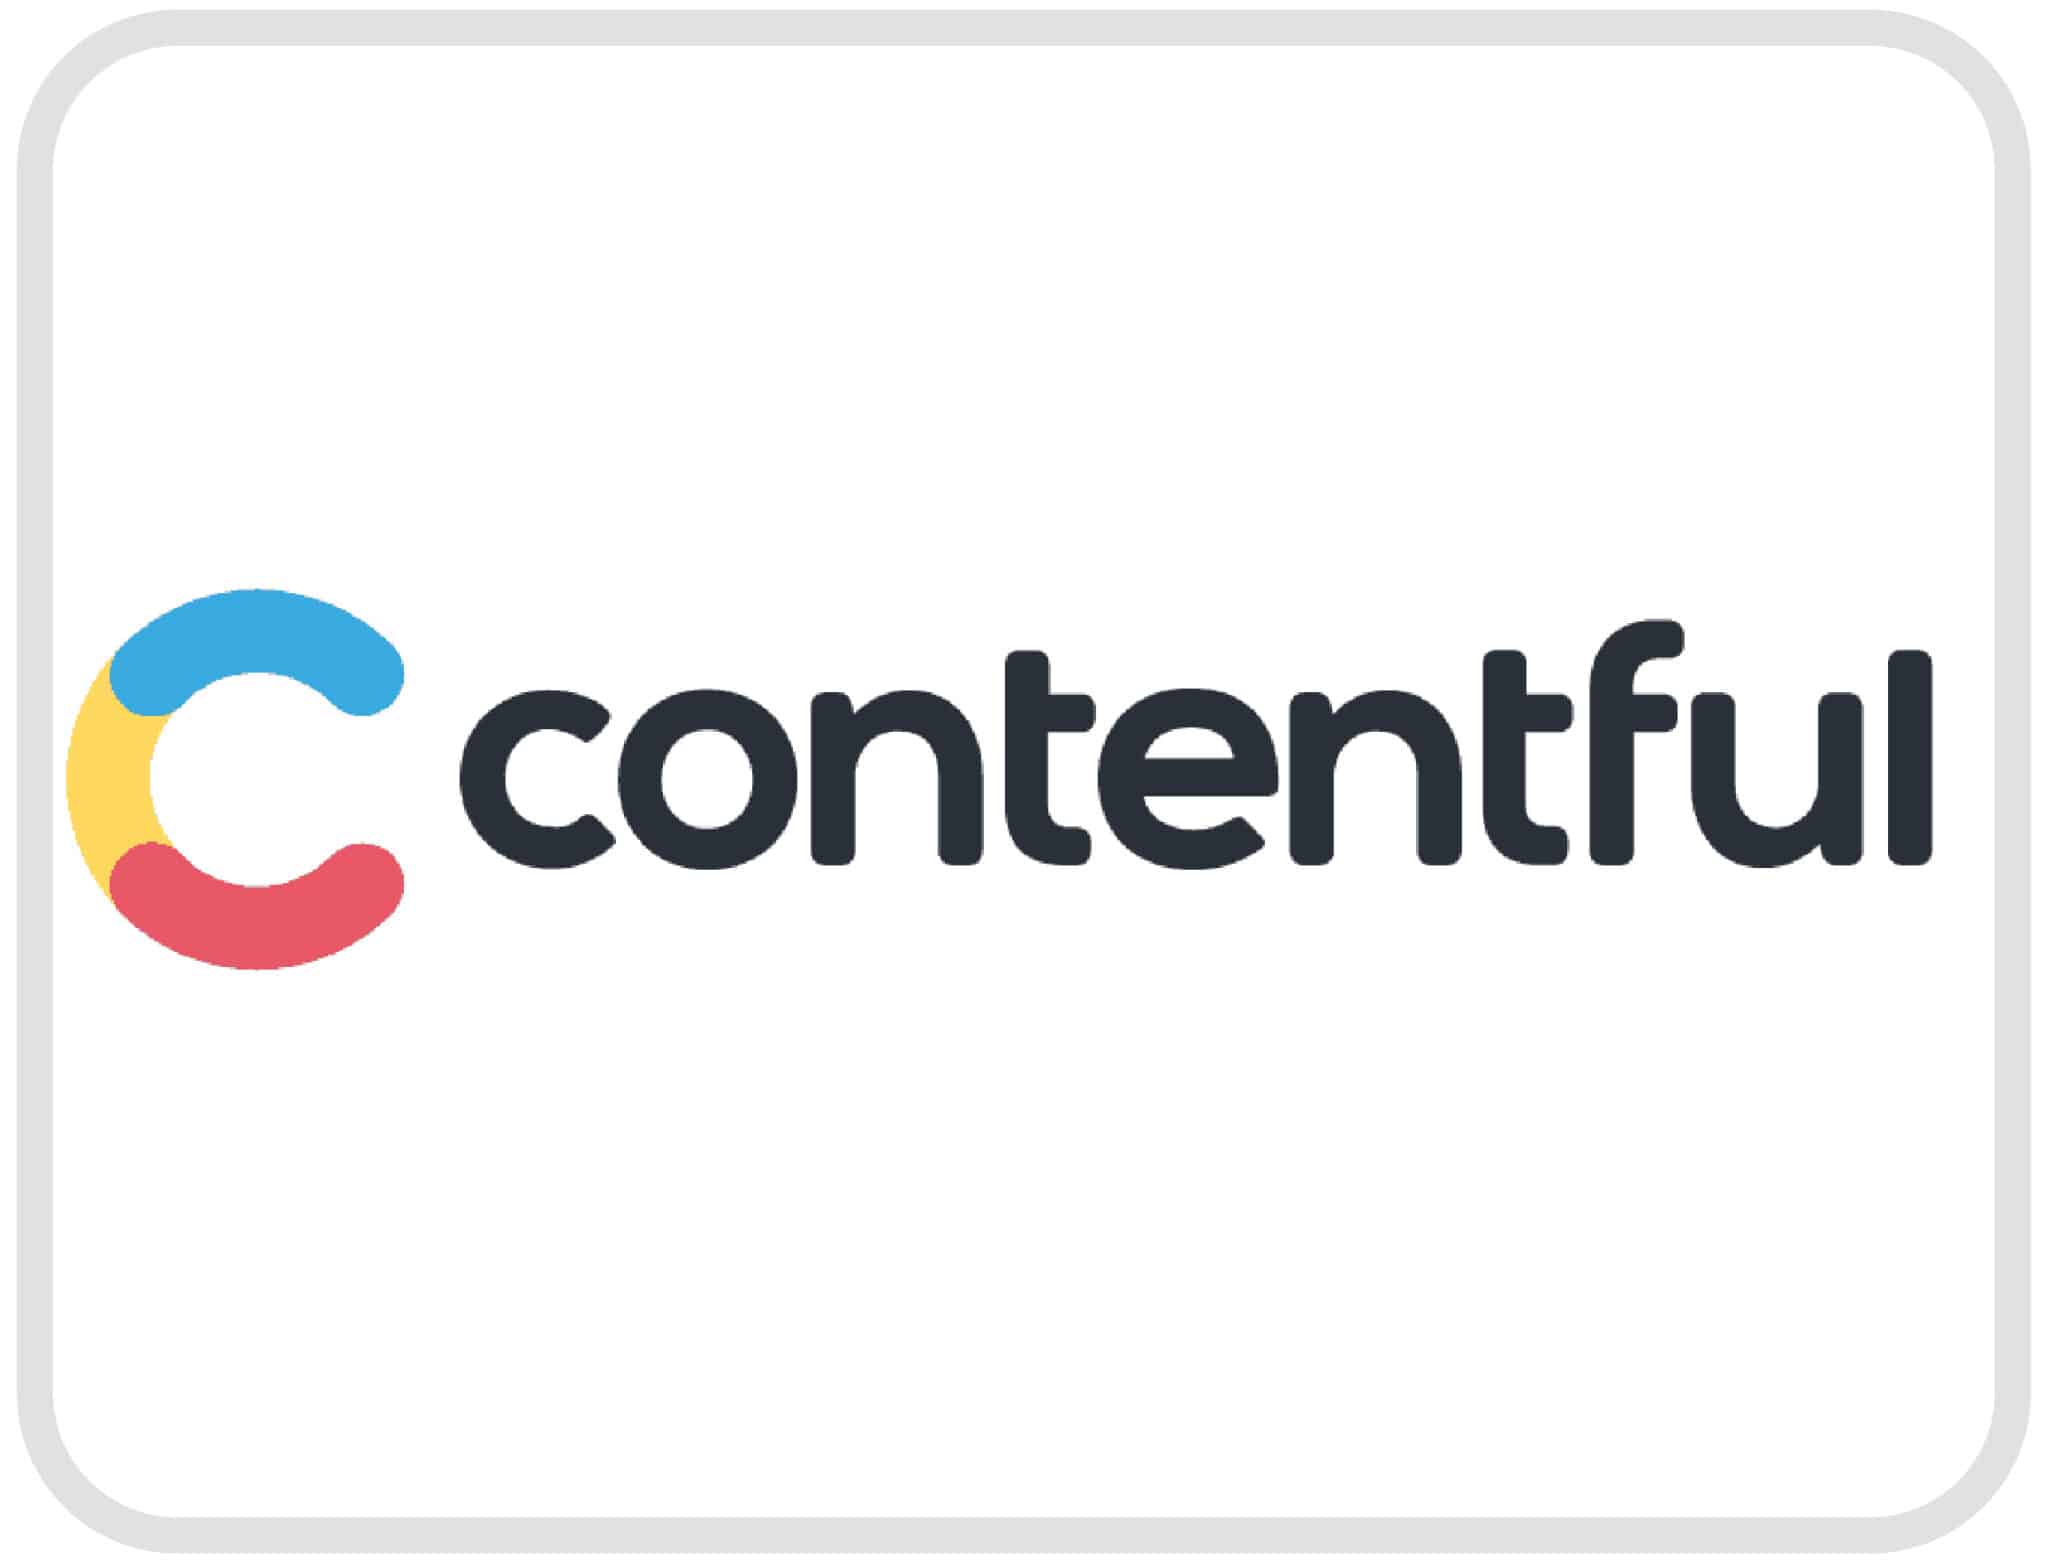 This is the contentful logo